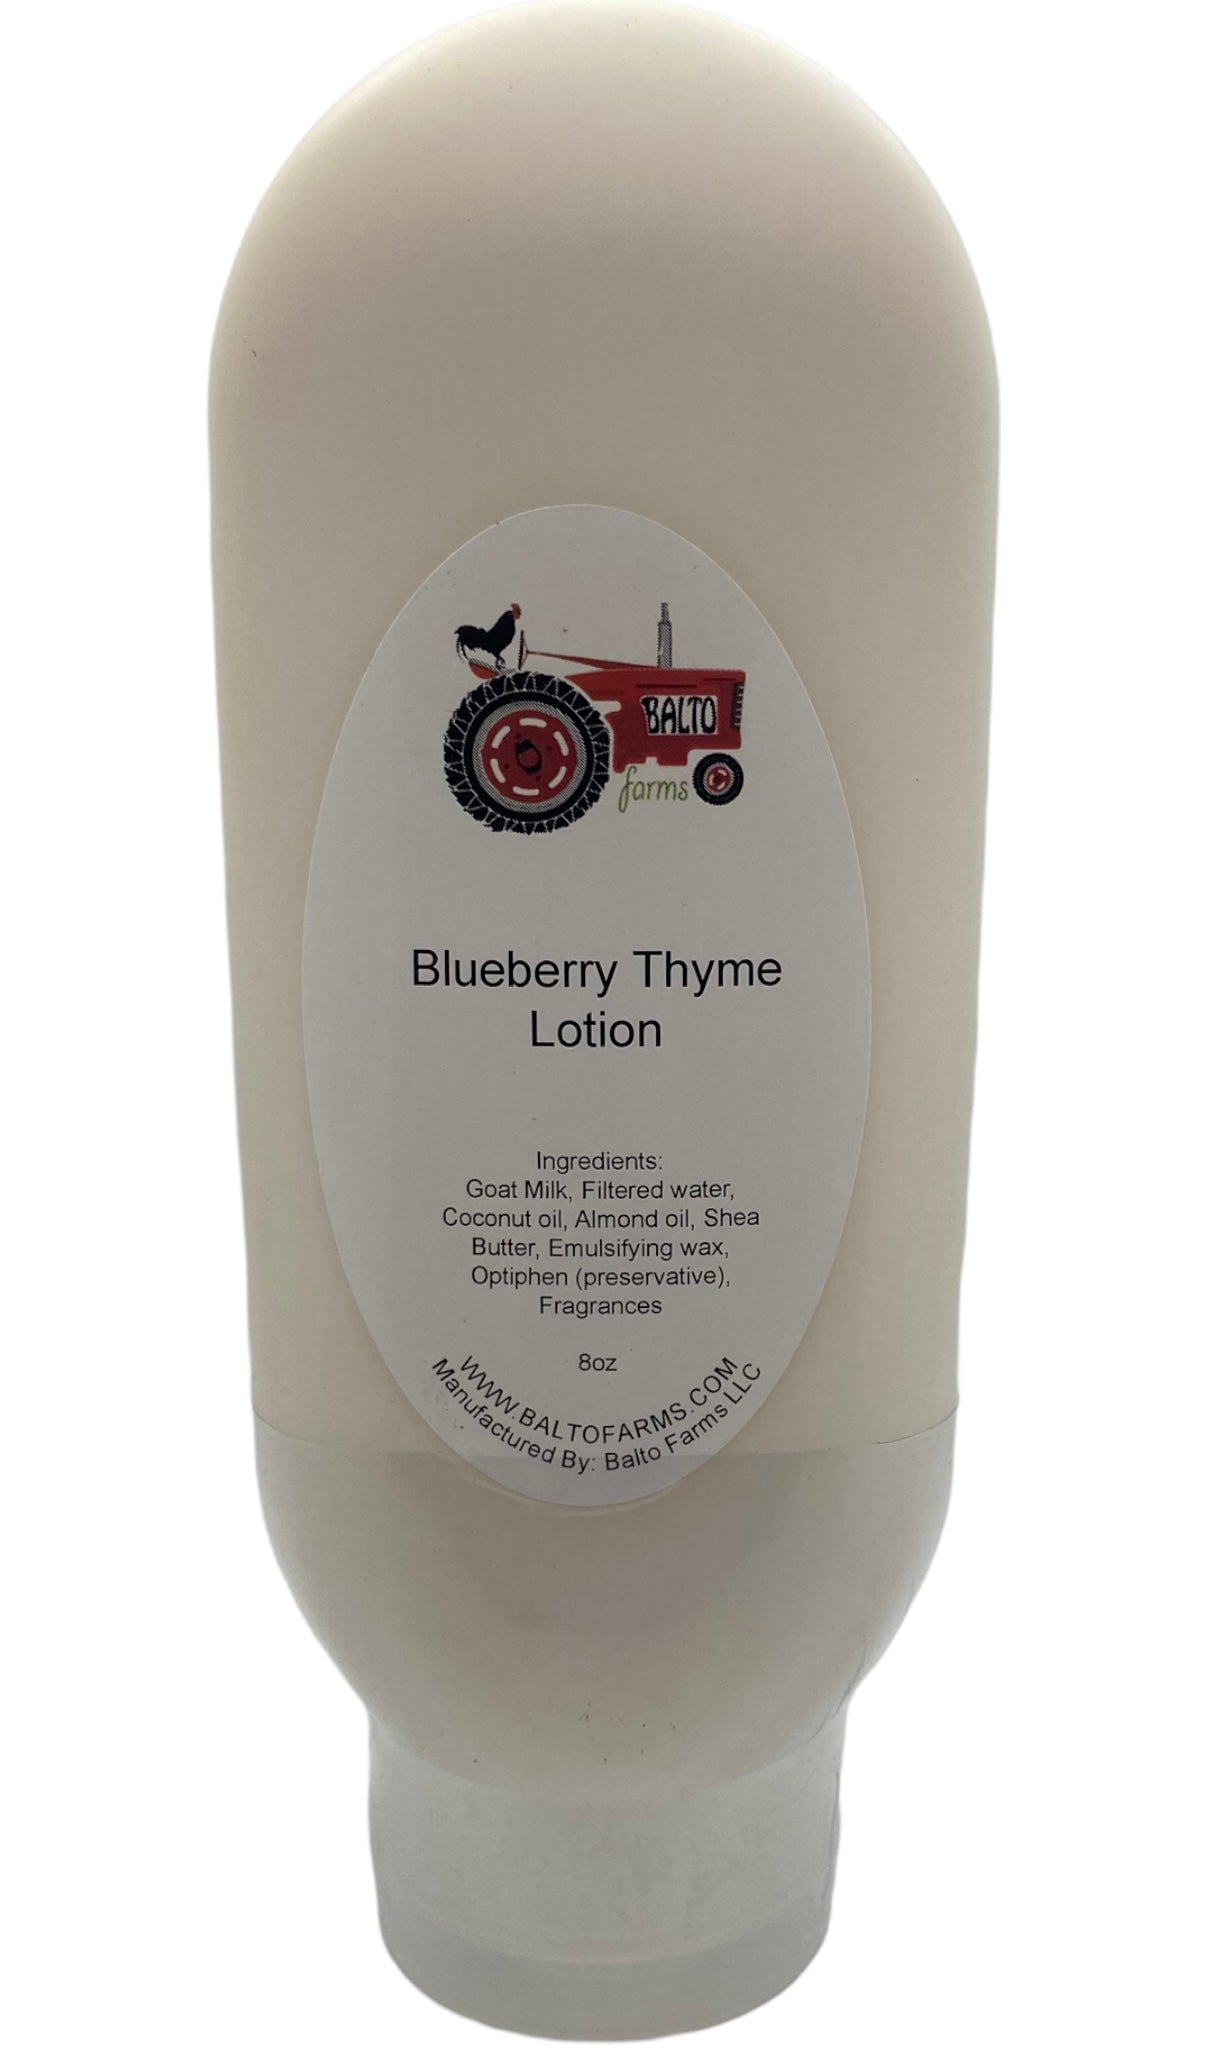 Blueberry Thyme Lotion